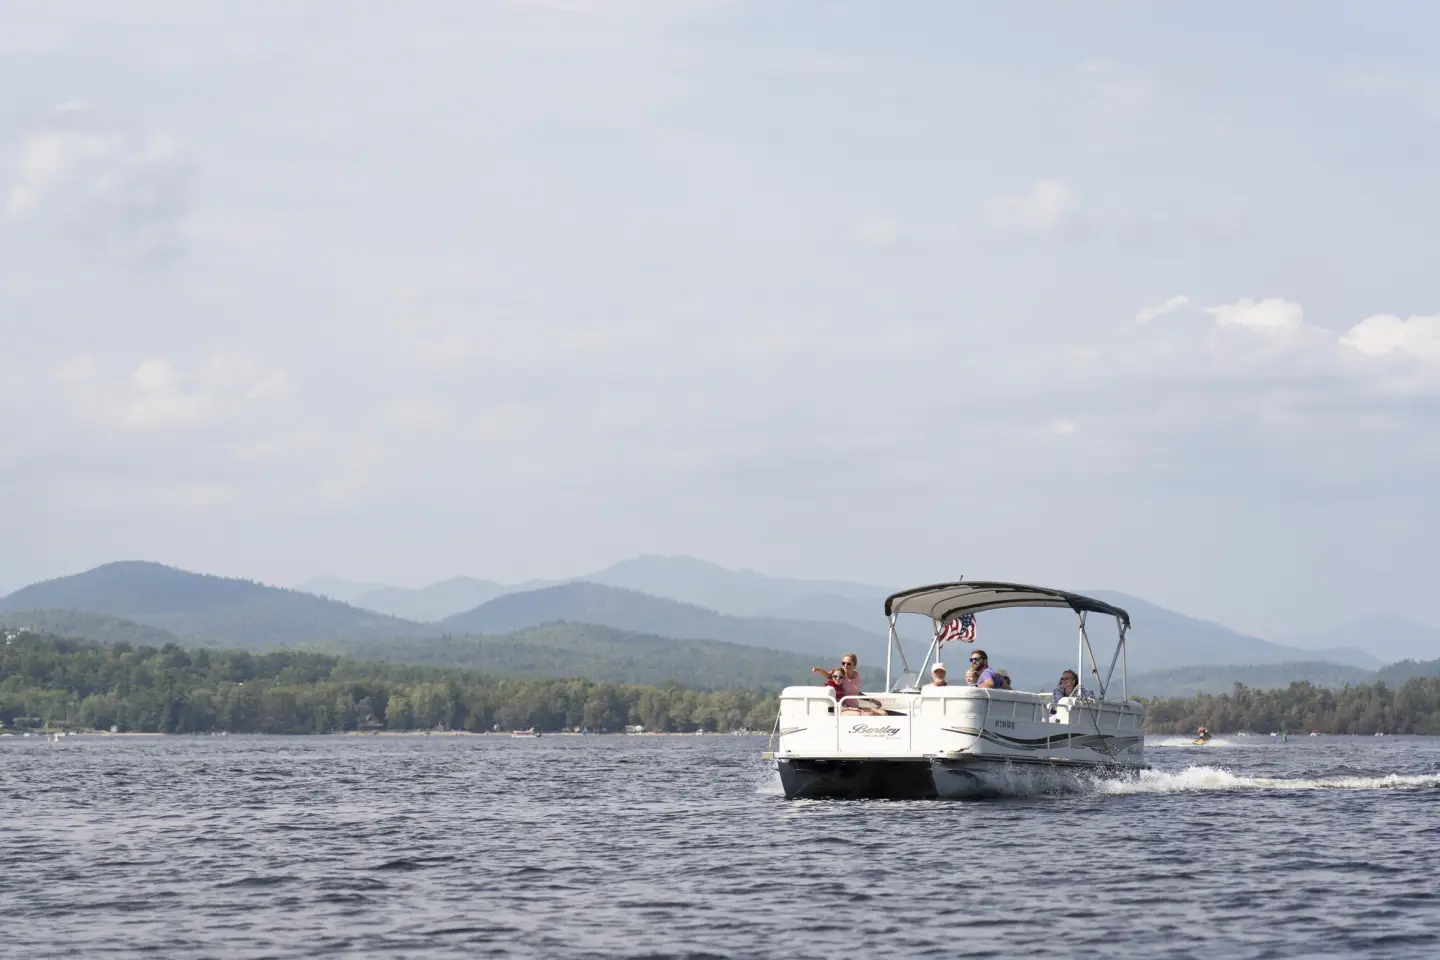 Summer is Spectacular on Schroon Lake